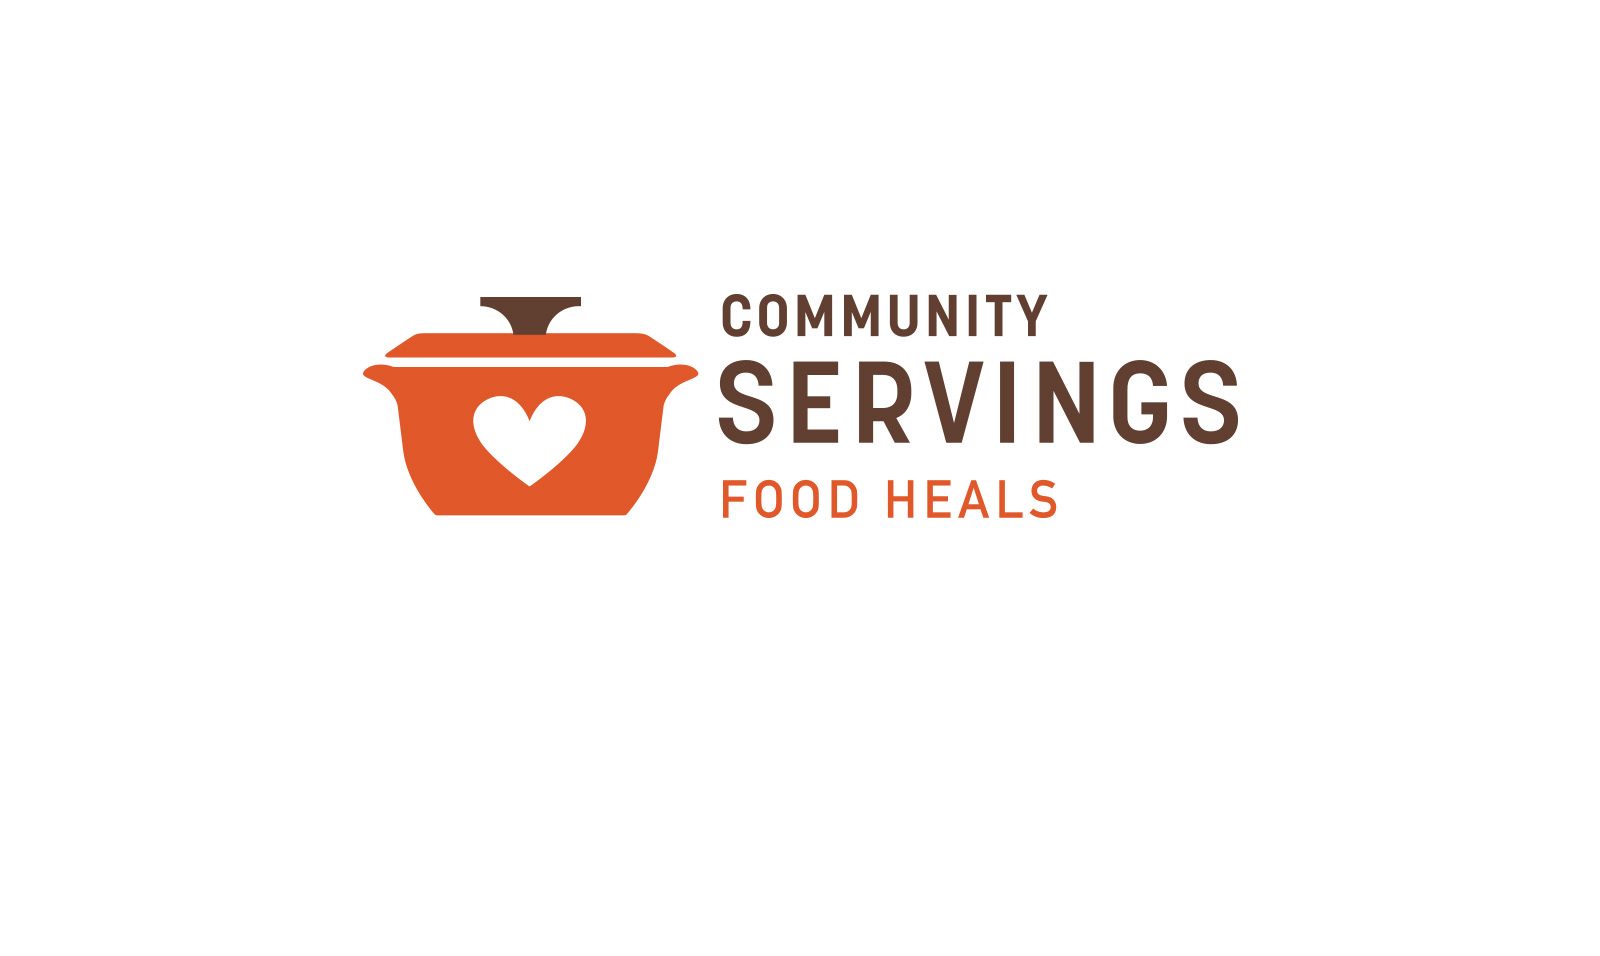 Community Servings logo and tagline